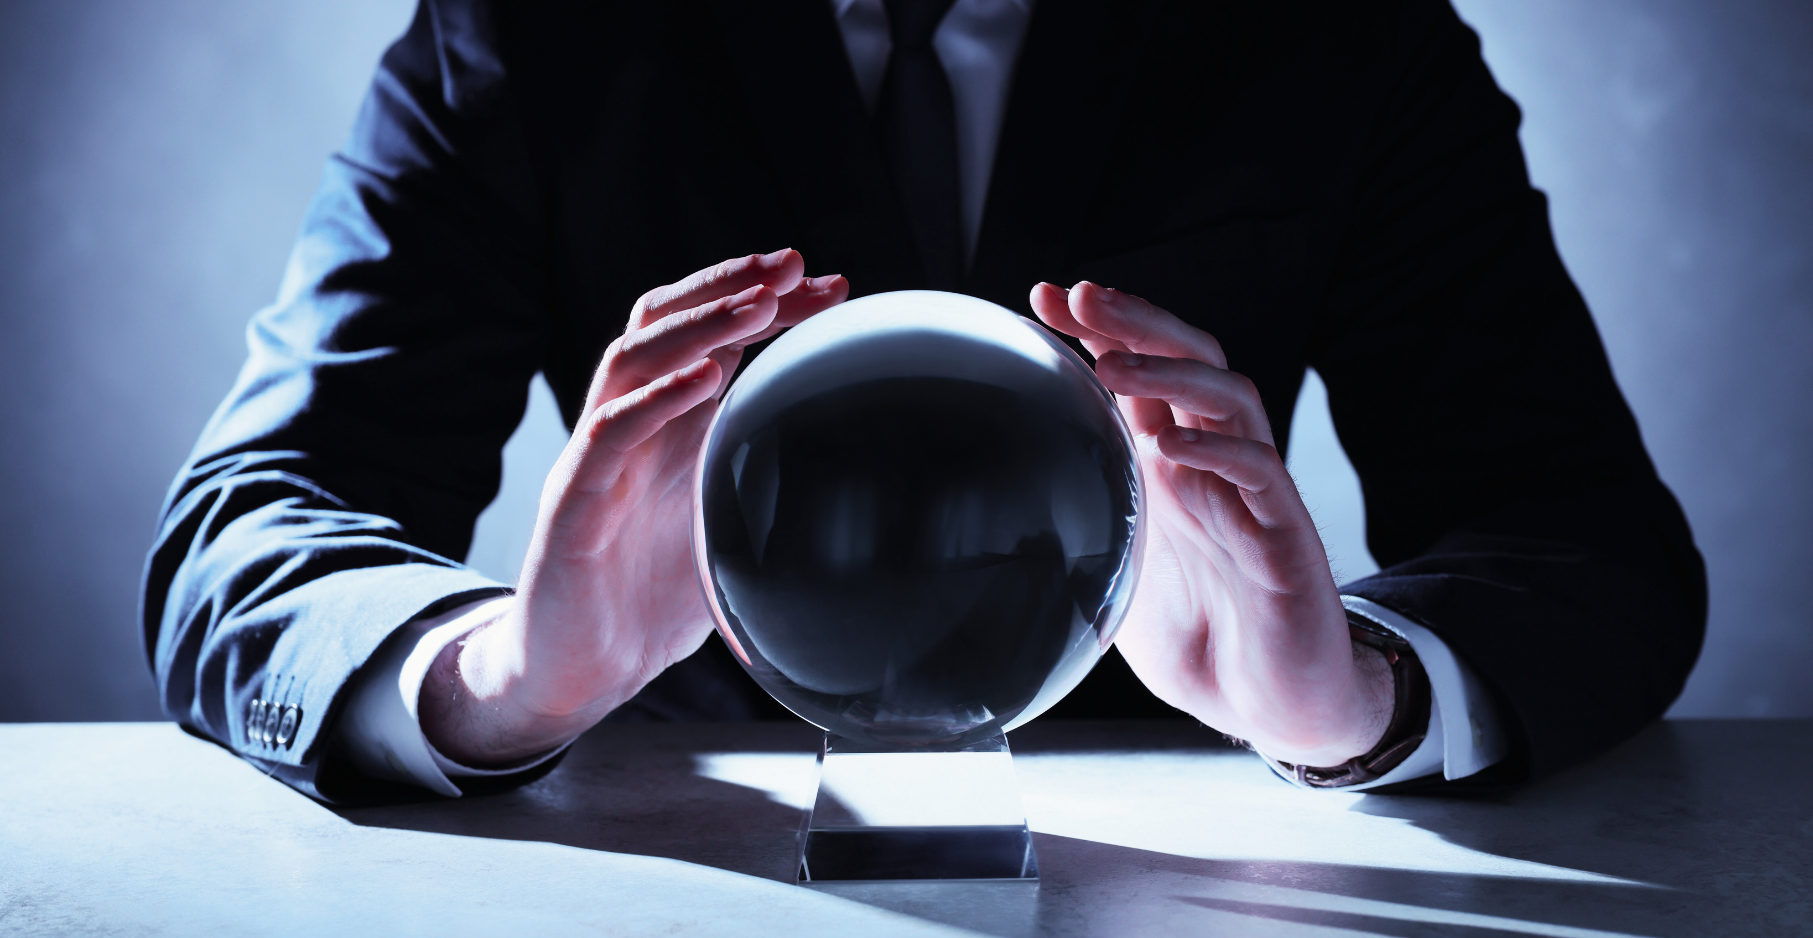 man in suit trying to predict the future with crystal ball